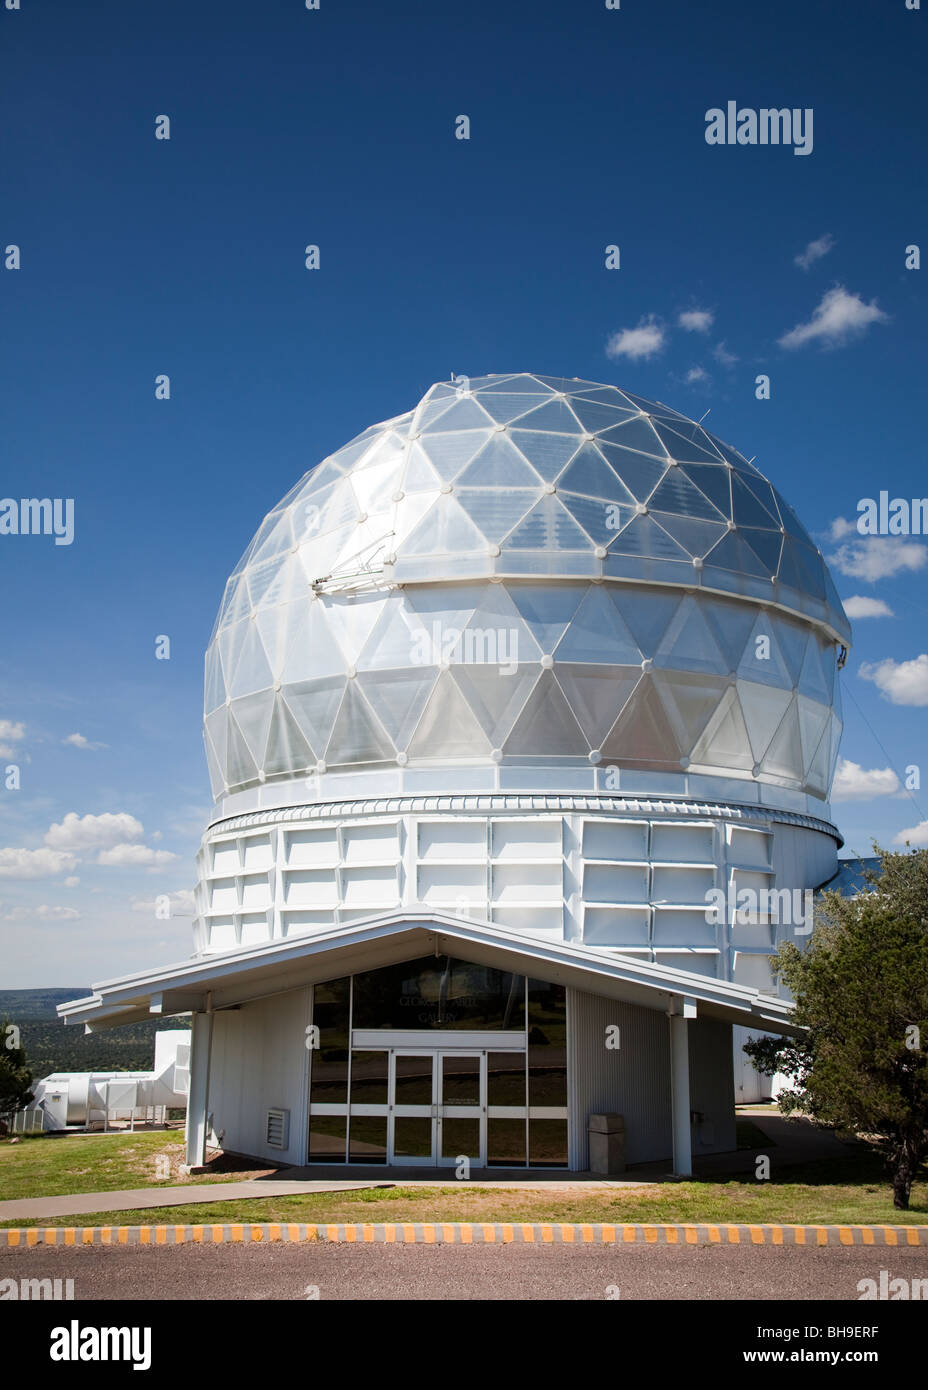 Hobby-Eberly Telescope dome and George T. Abell gallery McDonald Observatory Fort Davis Texas USA Stock Photo